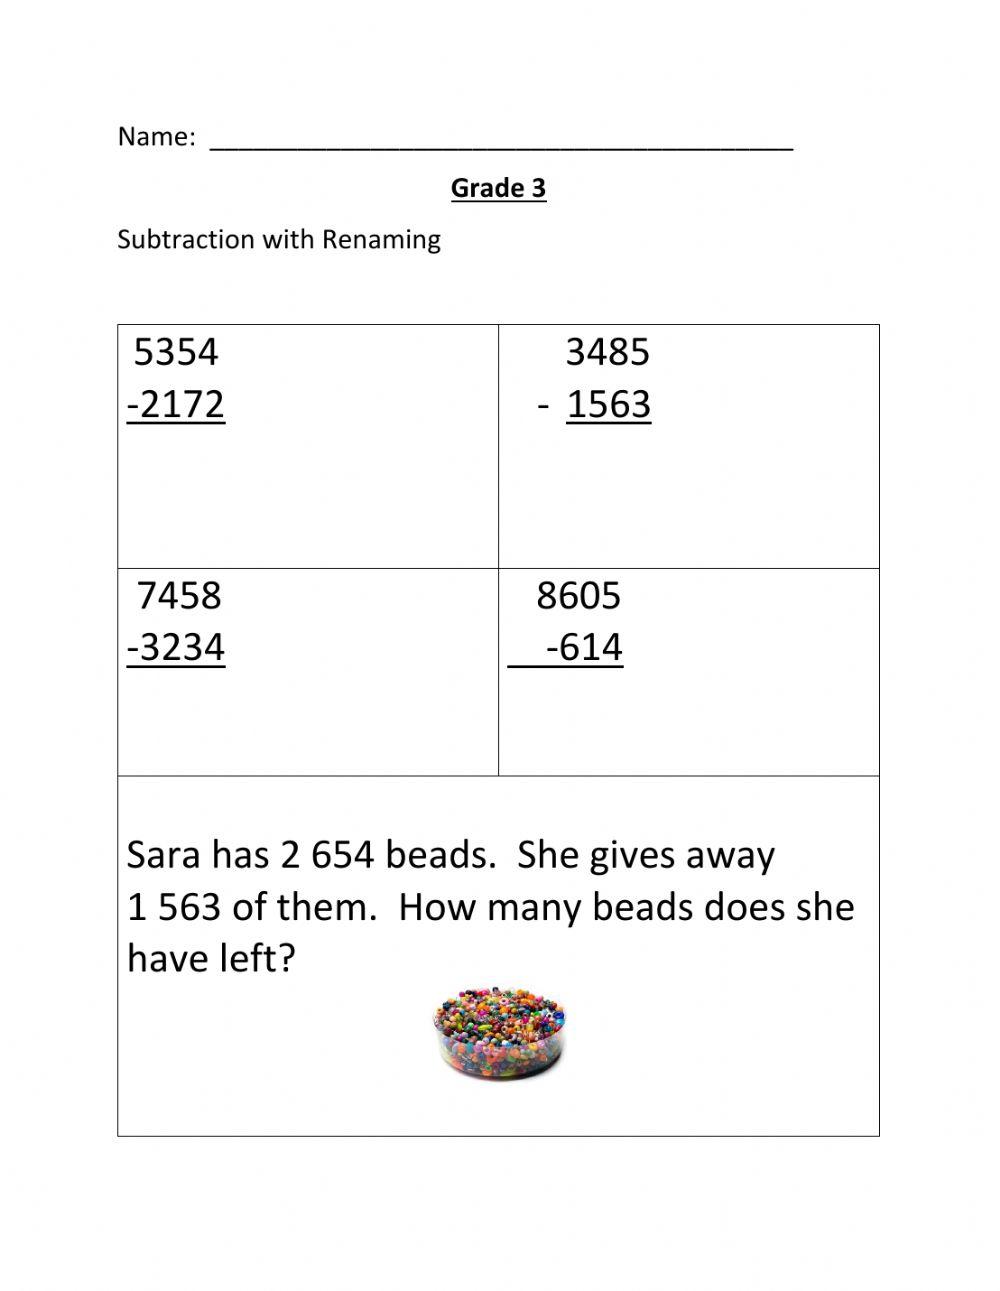 Subtraction with Renaming